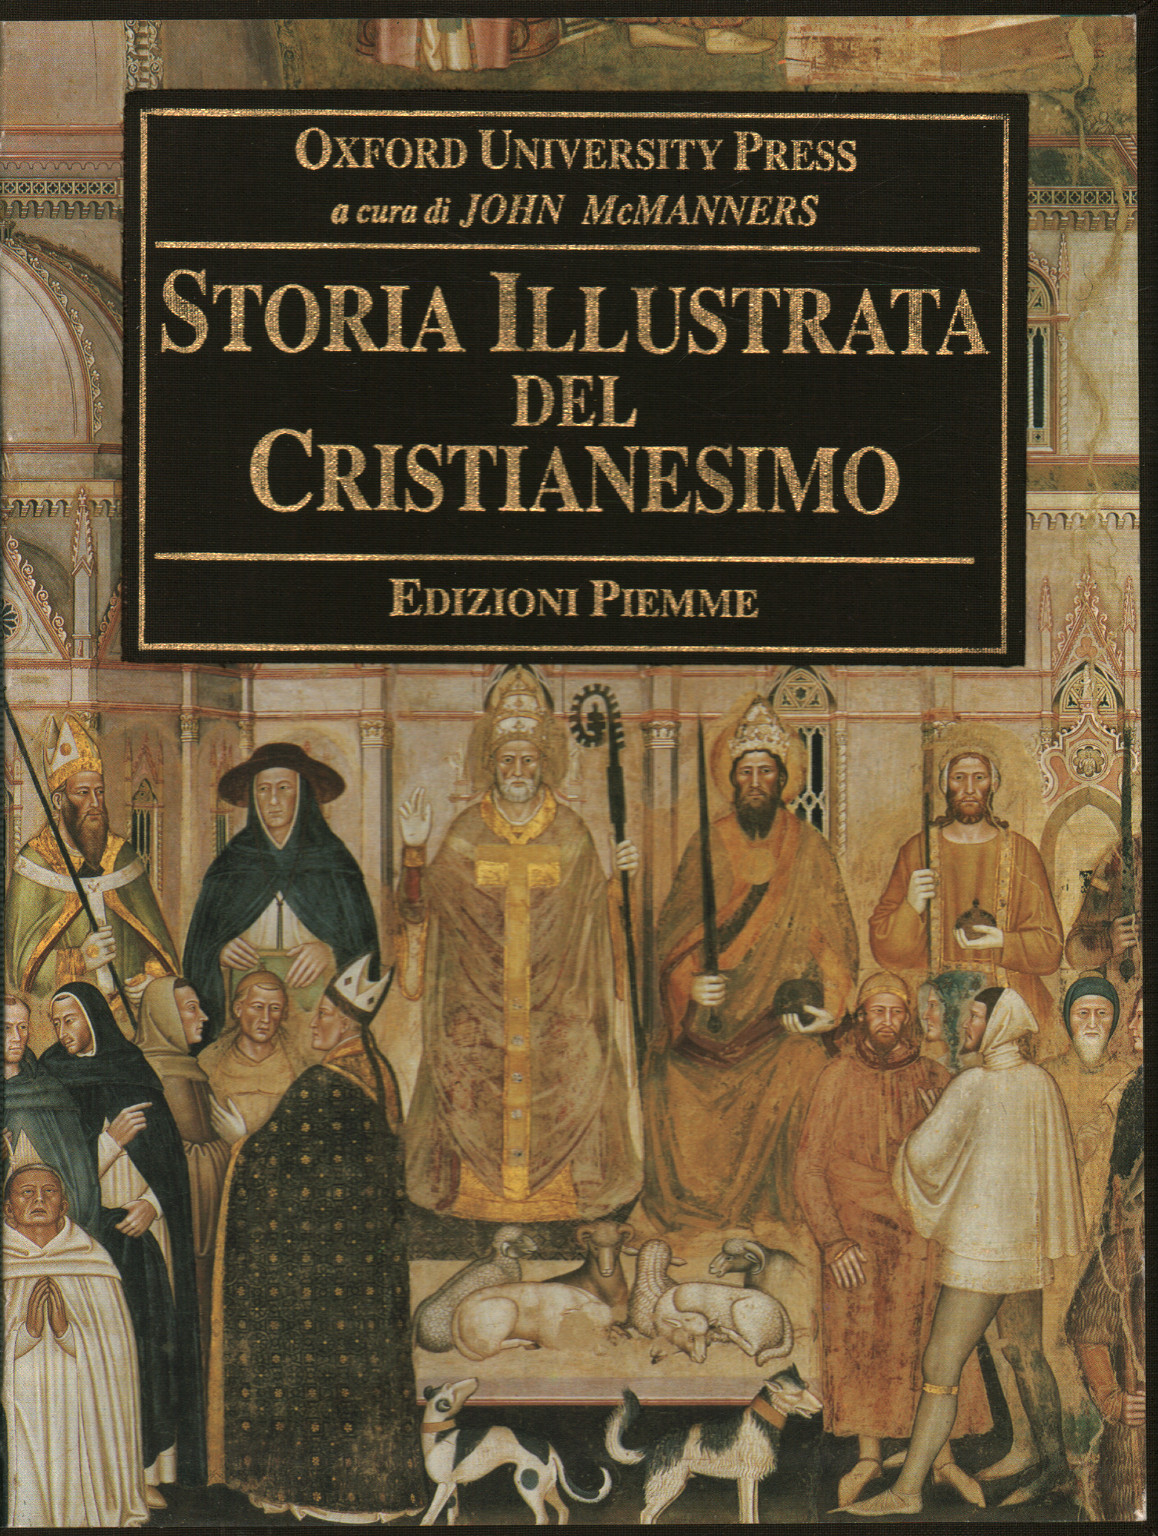 Illustrated history of Christianity